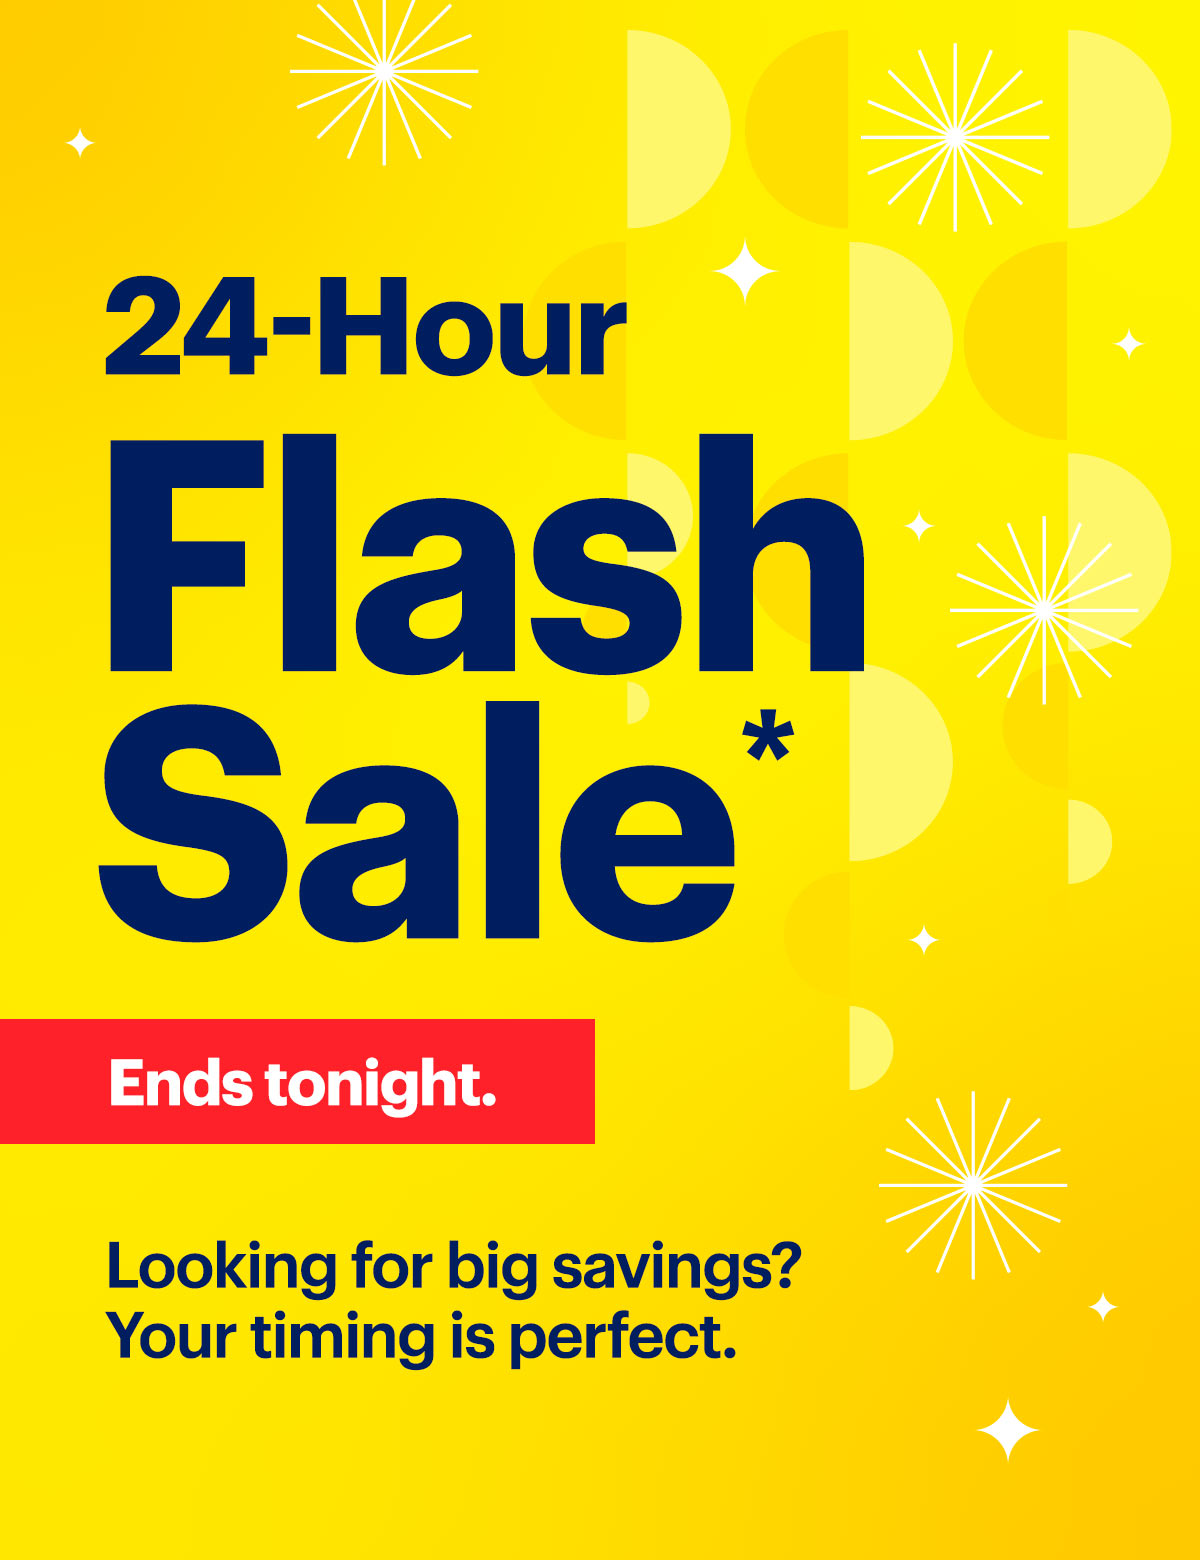 24-Hour Flash Sale. Ends tonight. Looking for big savings? Your timing is perfect. Shop now. Reference disclaimer. *%D%D 24-Hour Flas Sale h'%@ Looking for big savings? ; f Your timing is perfect. - 